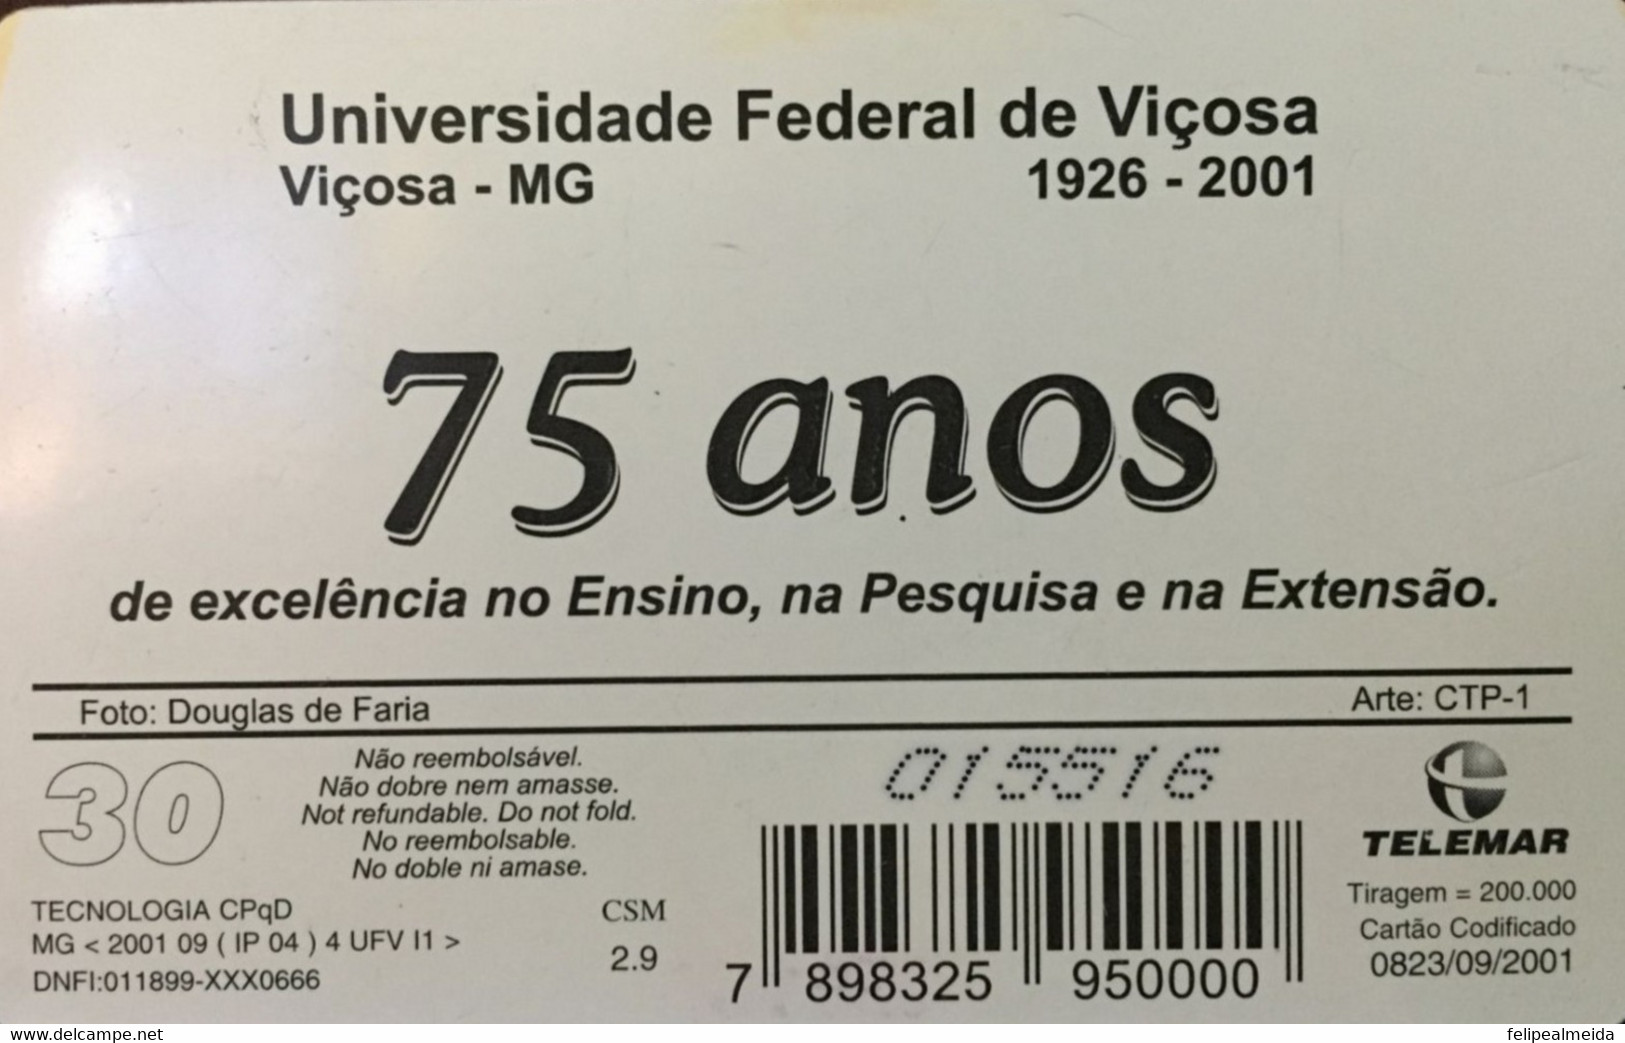 Phone Card Manufactured By Telemar In 2001 - 75 Years Of The Federal University Of Viçosa 1926 To 2001 - Photographer Do - Kultur